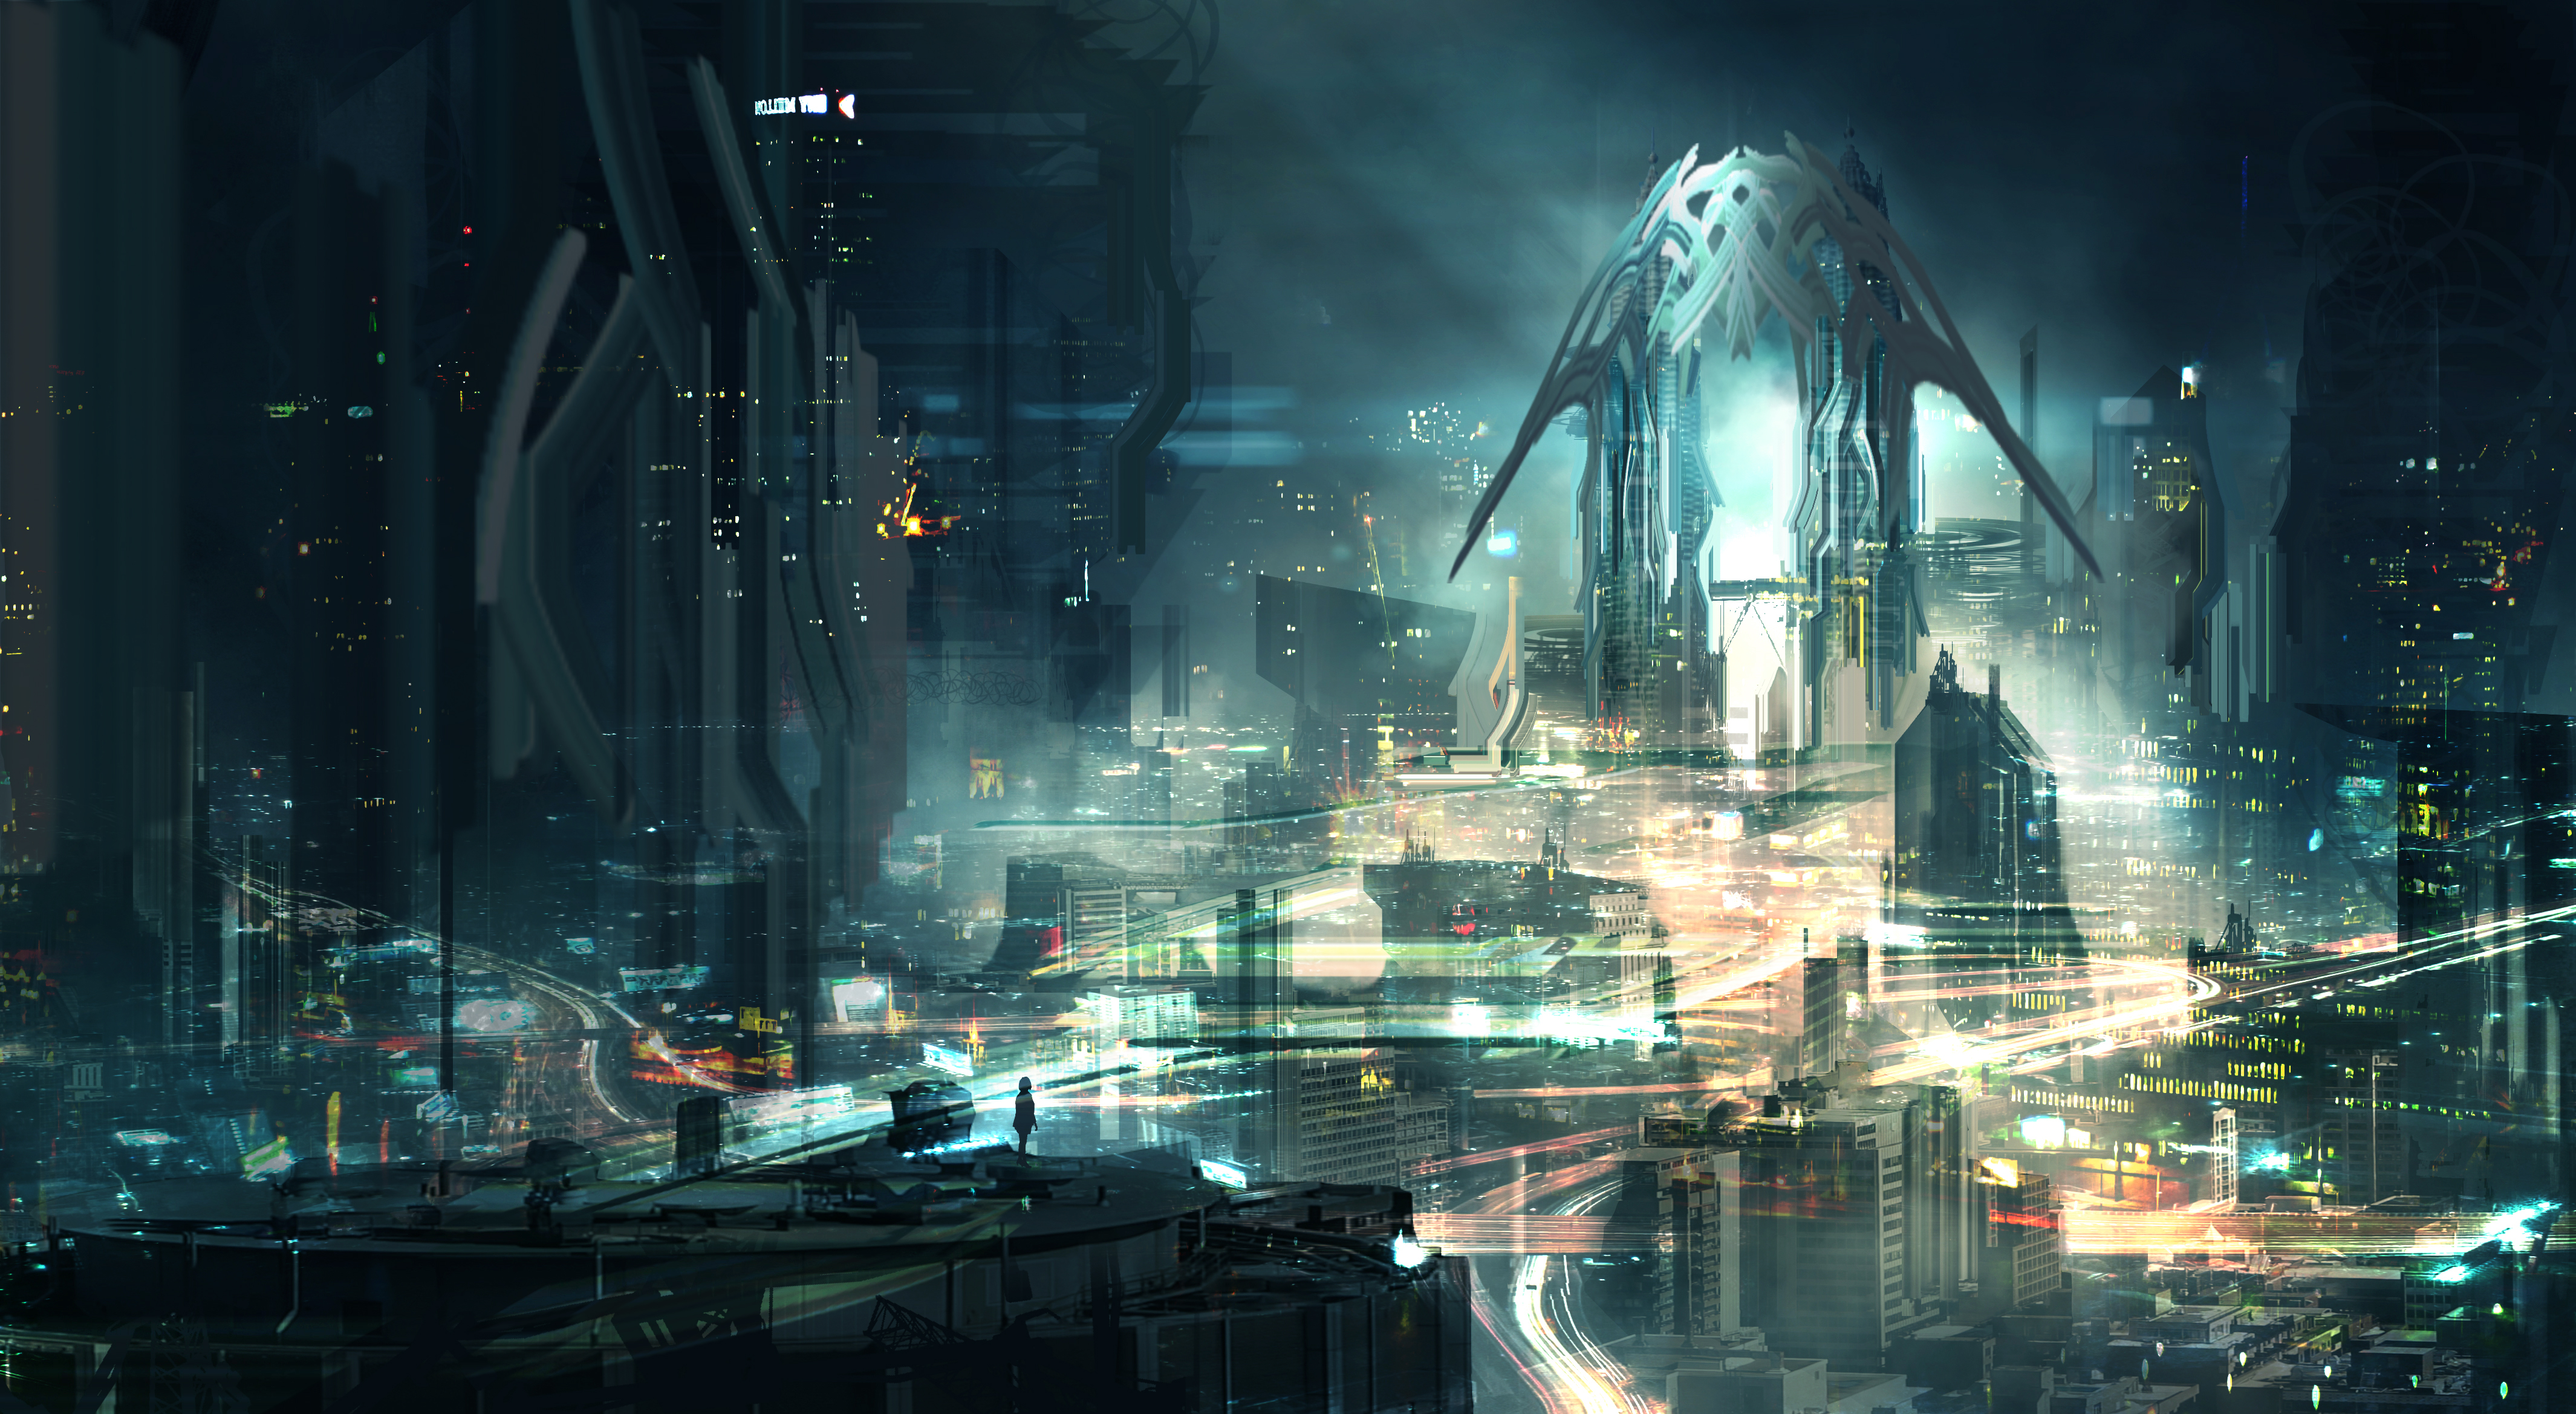 The Lights of New Metropolis by Vincentius Matthew